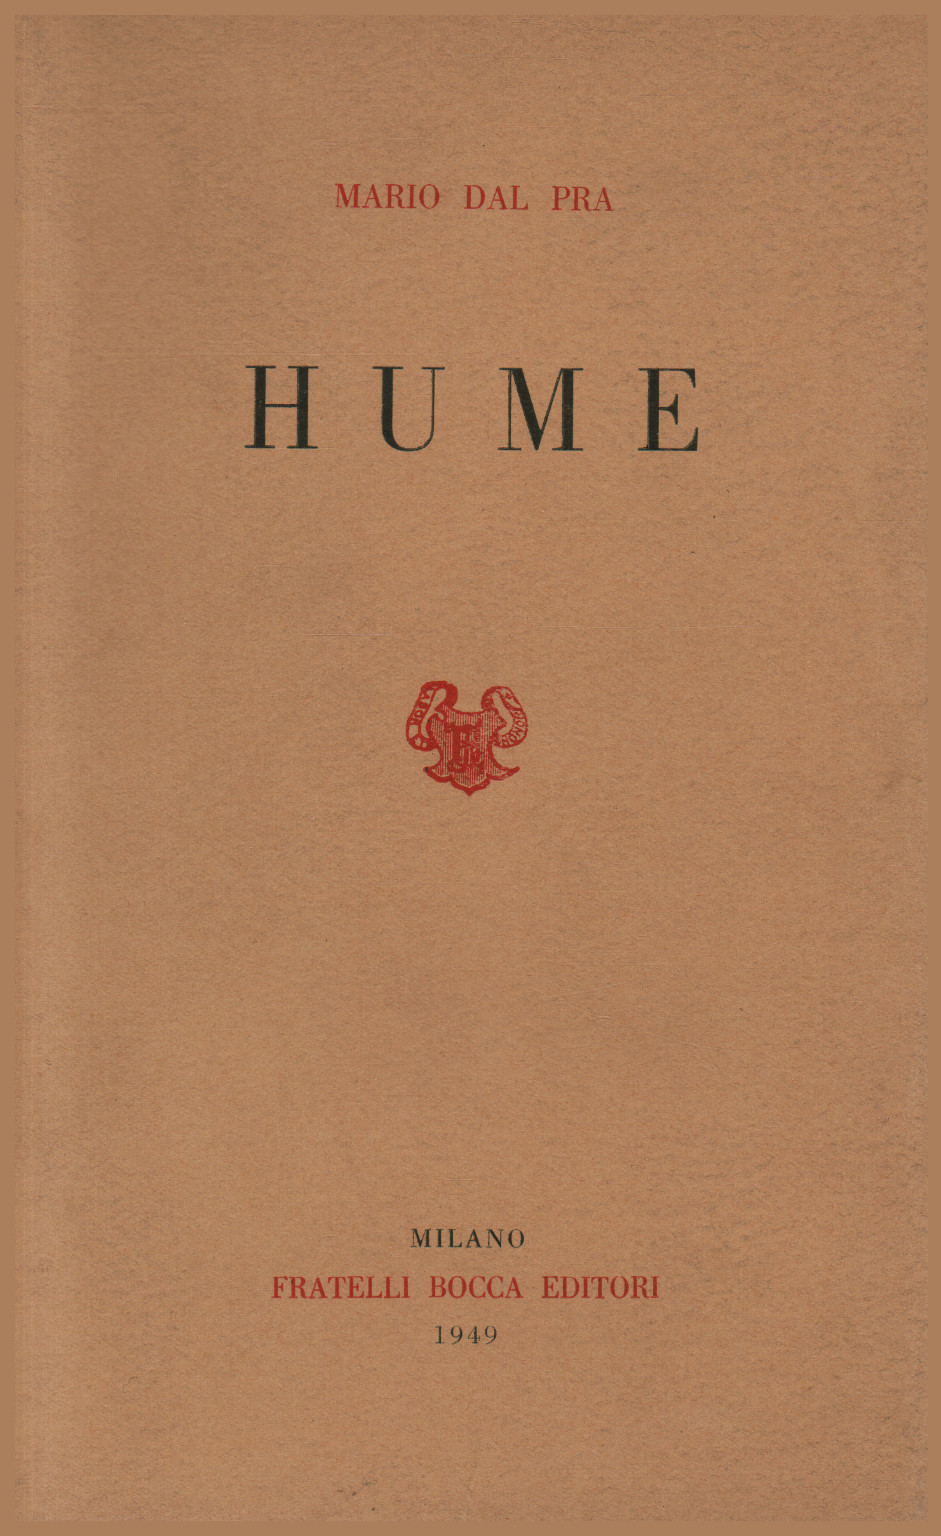 Hume, s.a.